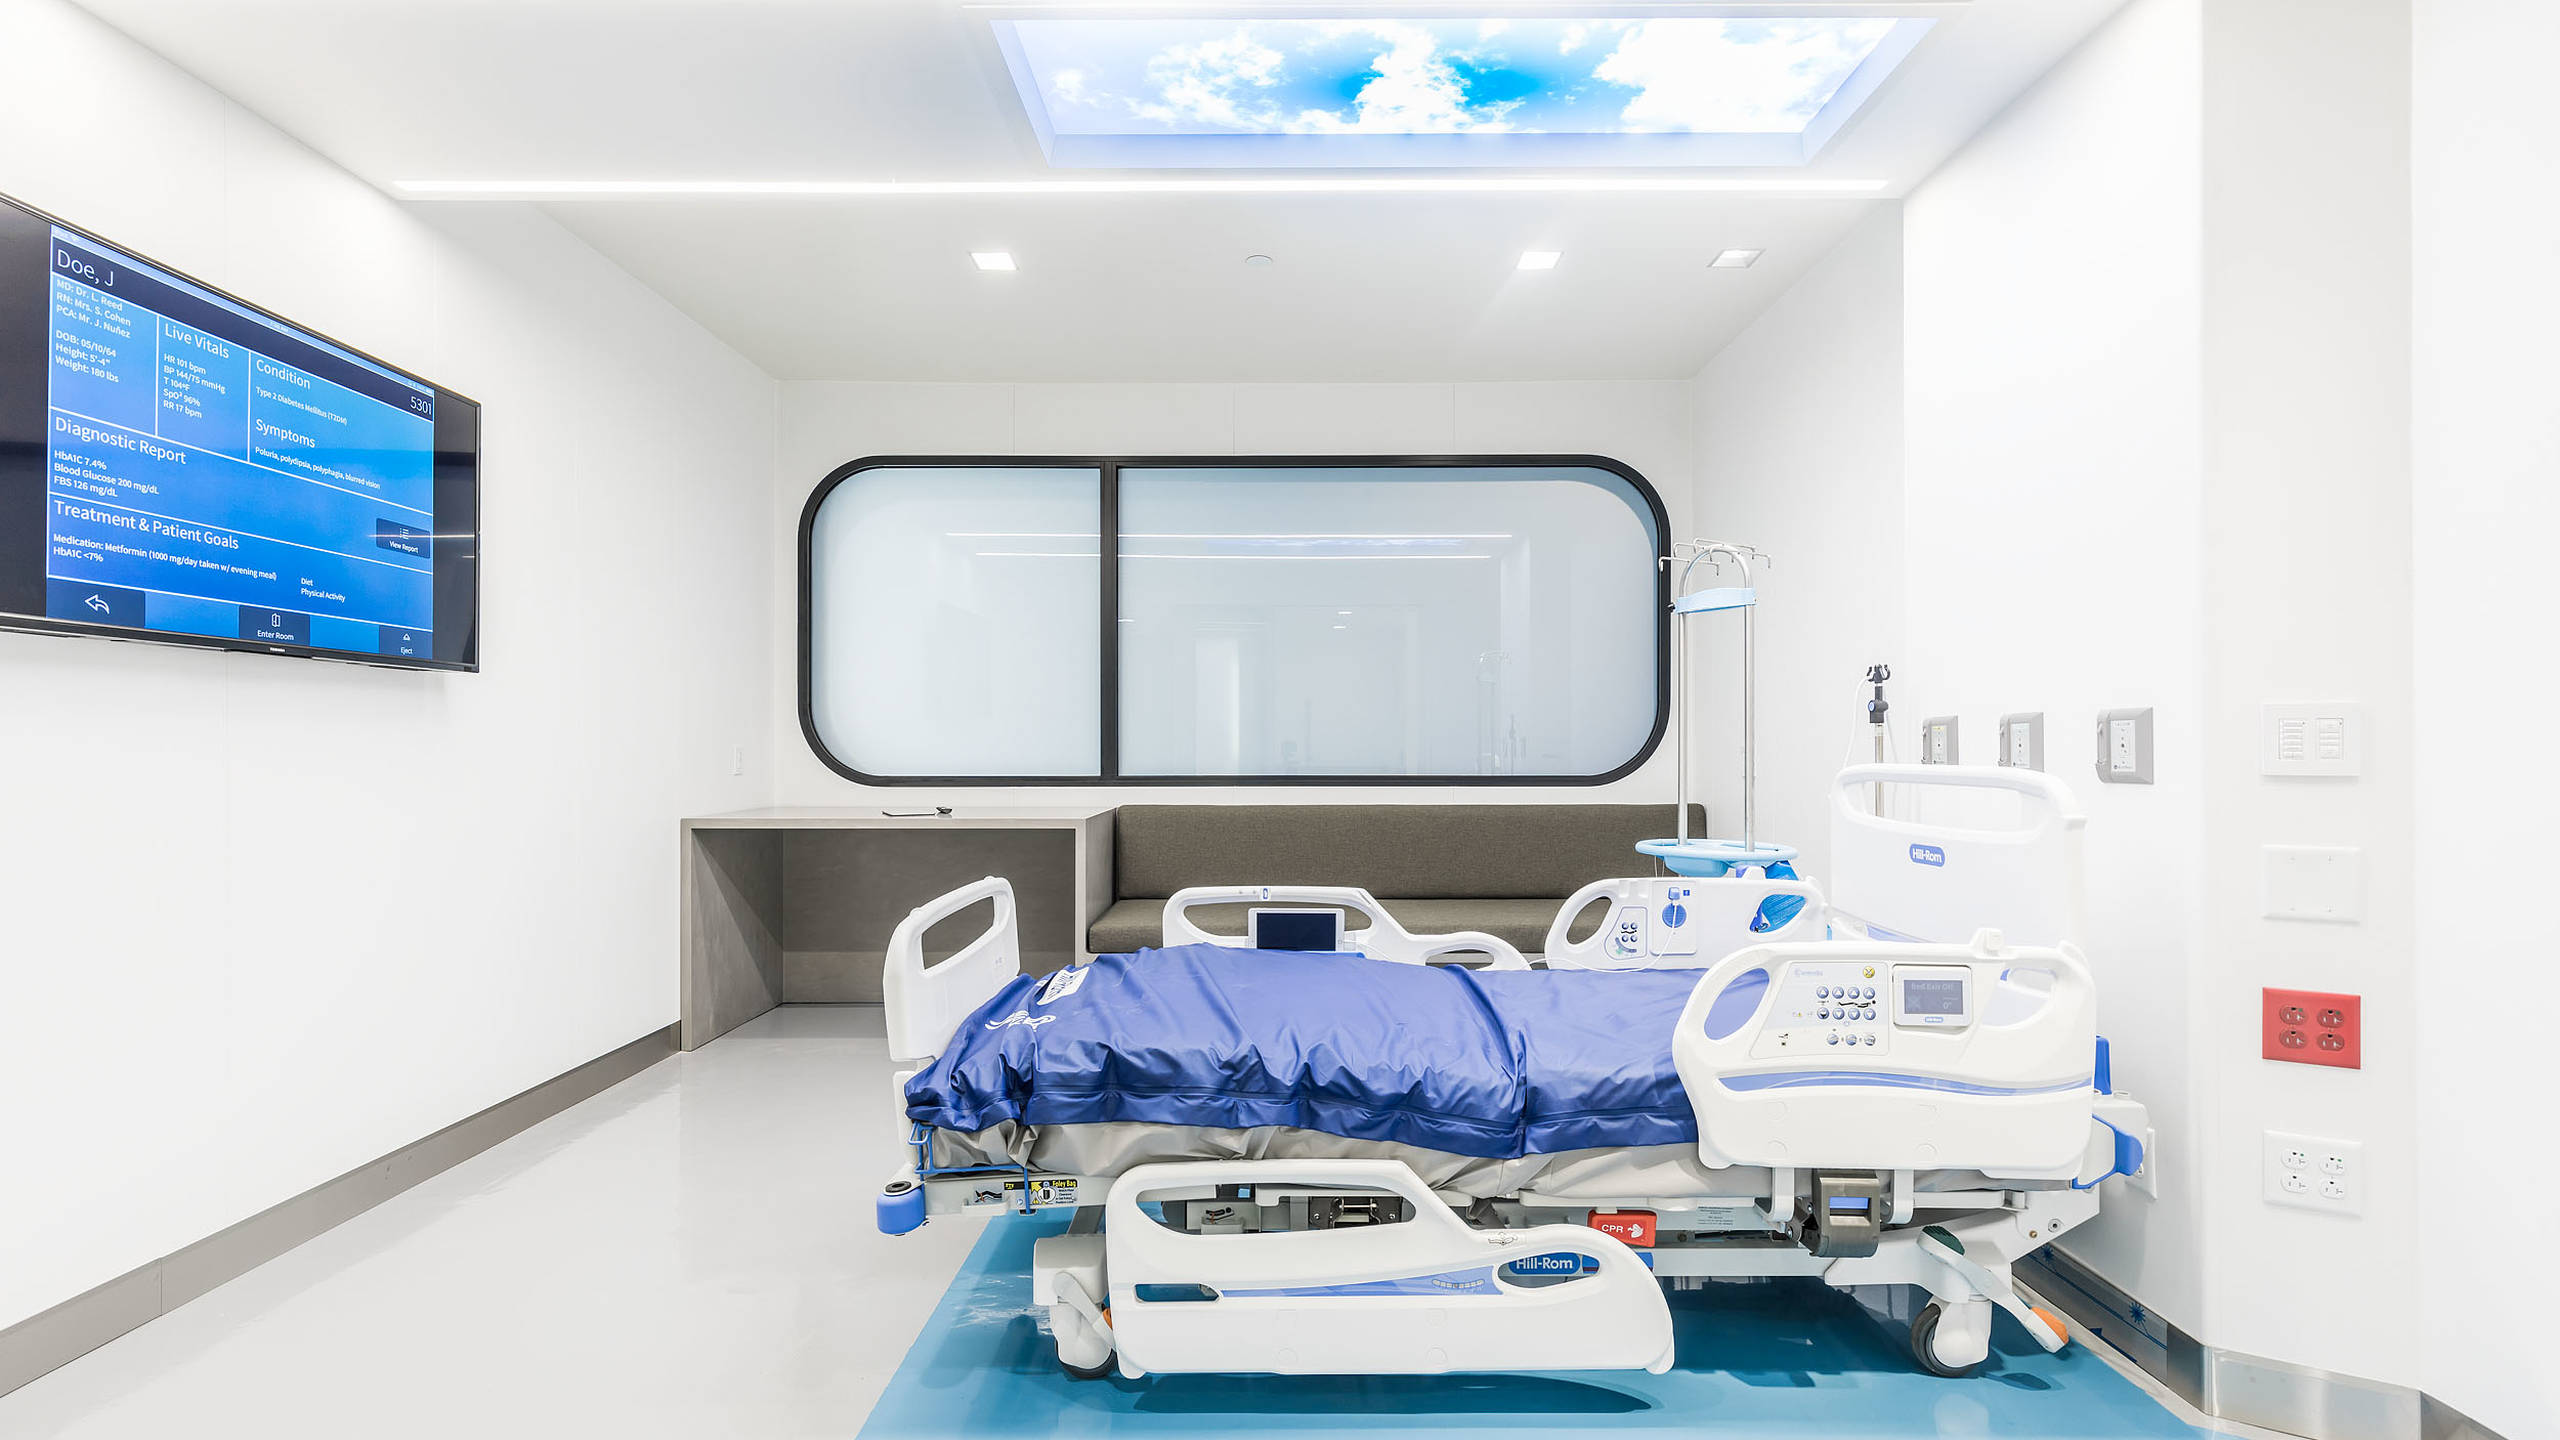 ADMARES built smart hospital rooms can now be purchased on Amazon